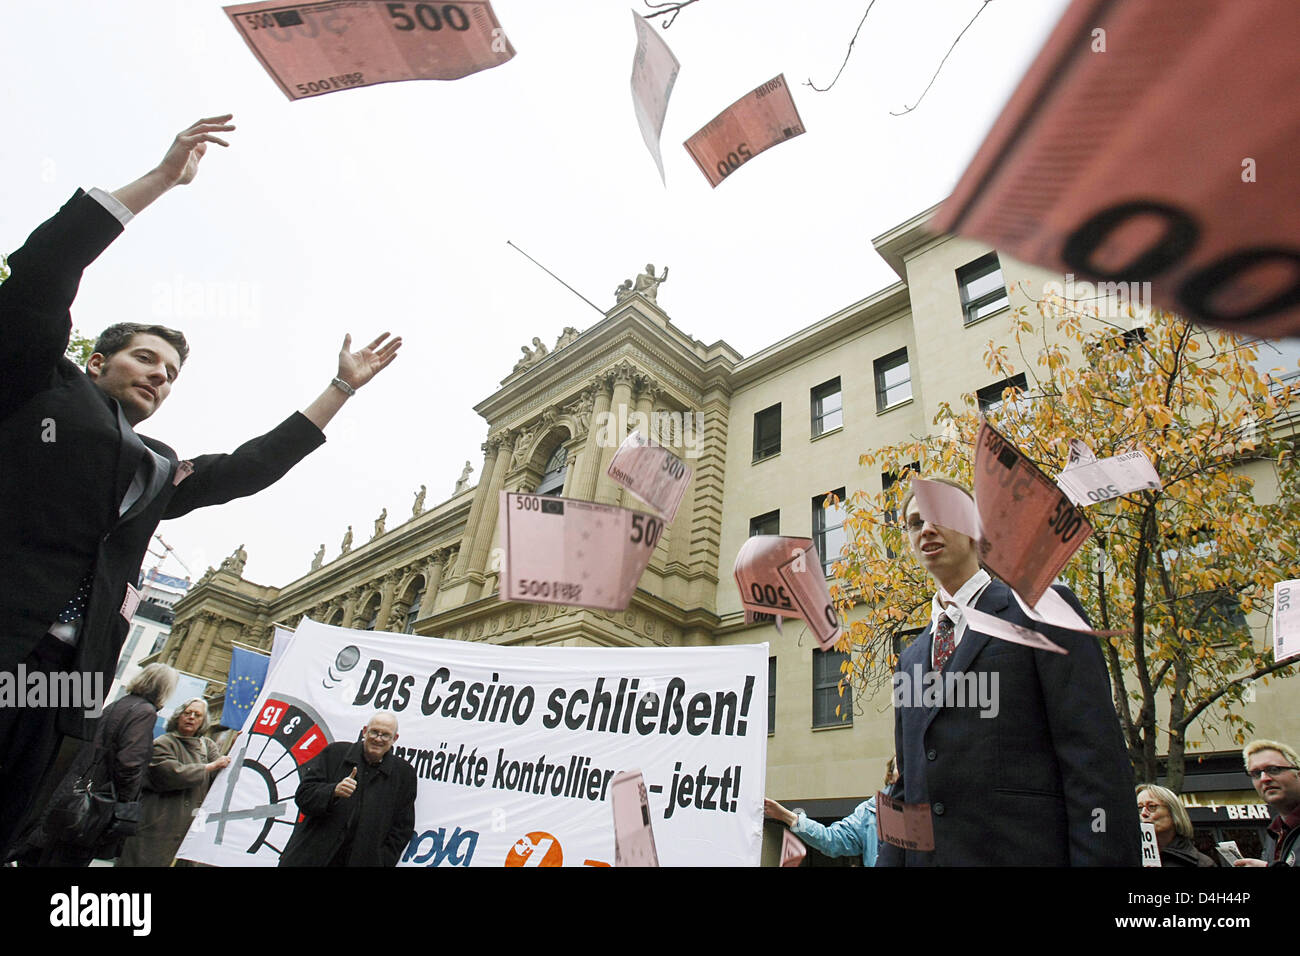 Members of activist organisation 'attac' demonstrate with fake bank notes and a banner reading 'Shut down the casino! Control financial markets now!' outside Frankfurt Stock Exchange in Frankfurt Main, Germany, 22 October 2008. 'Attac' calls for a change of system and massive investments into the social infrastructure, in order to ease sozial consequences of the economic crisis. Ph Stock Photo